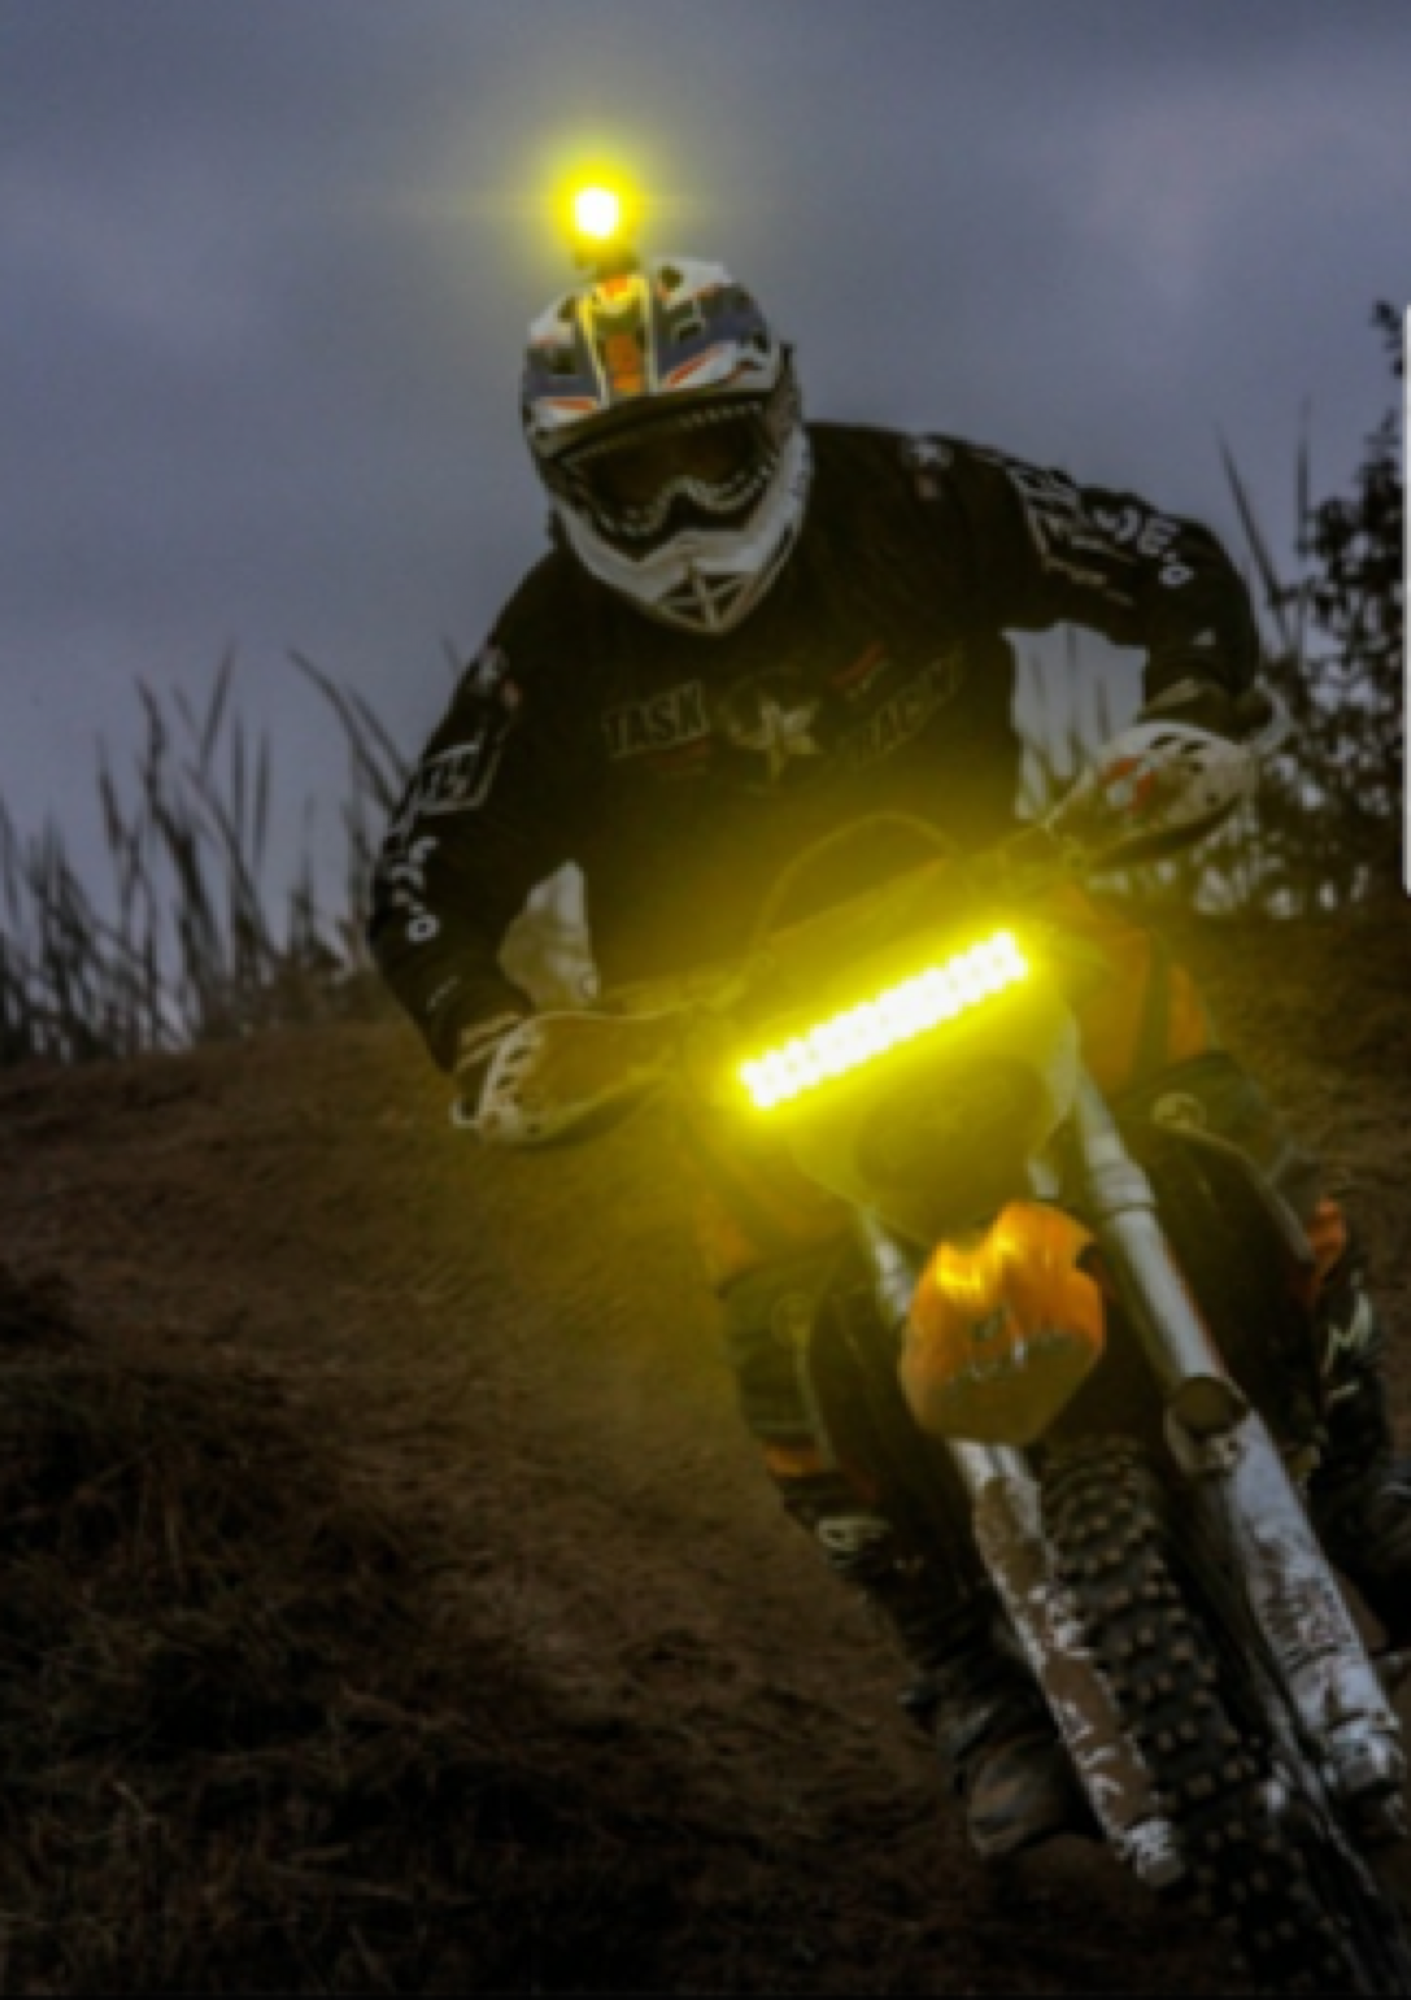 Bar-End-Lights Top 6 Bike Accessories While Riding Dirt Bike at Night